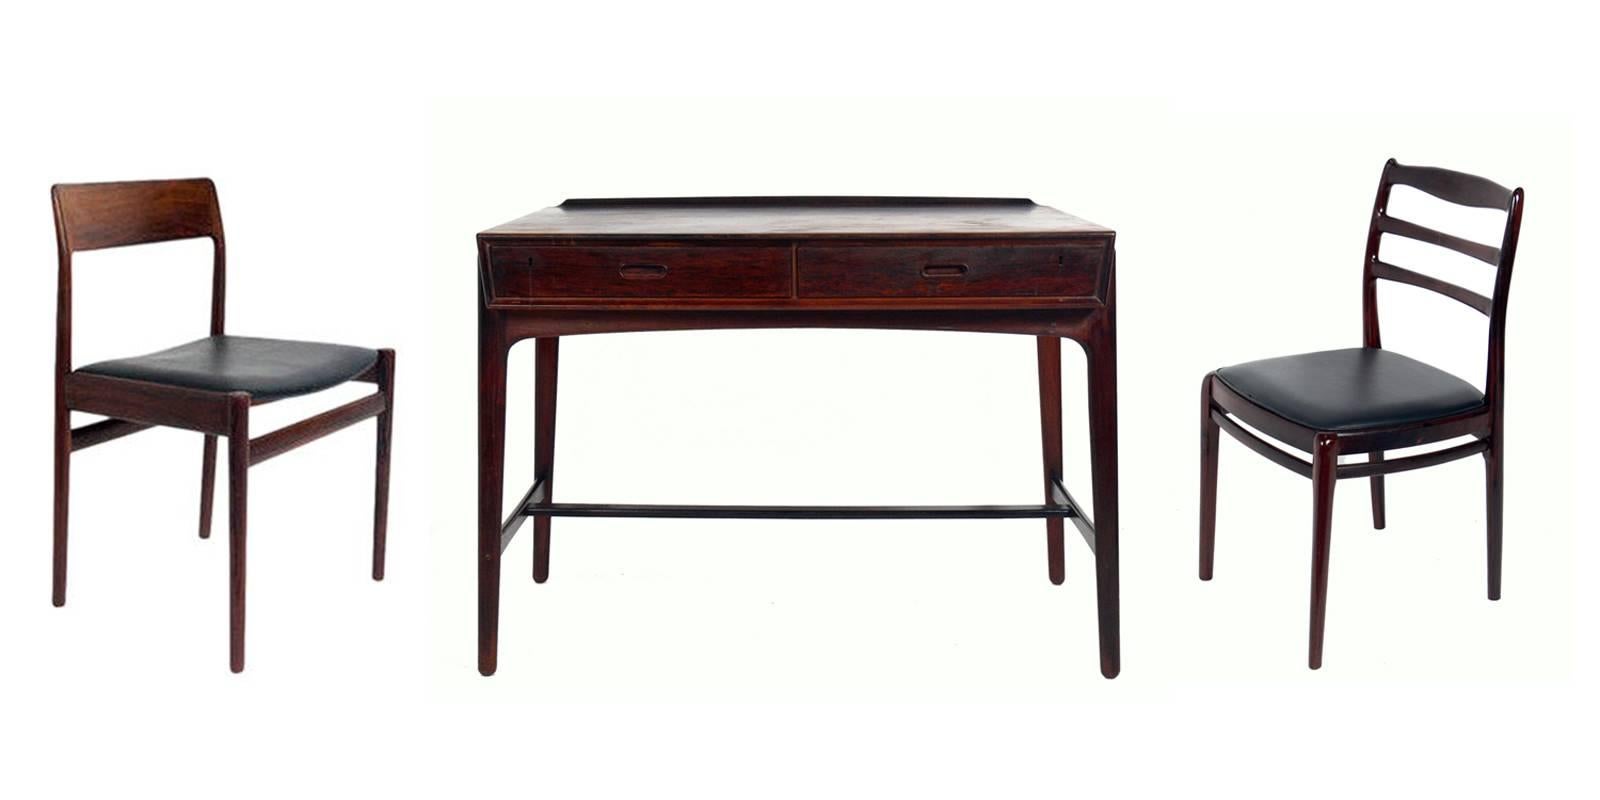 Mid-20th Century Danish Modern Rosewood Desk by Svend and Madsen